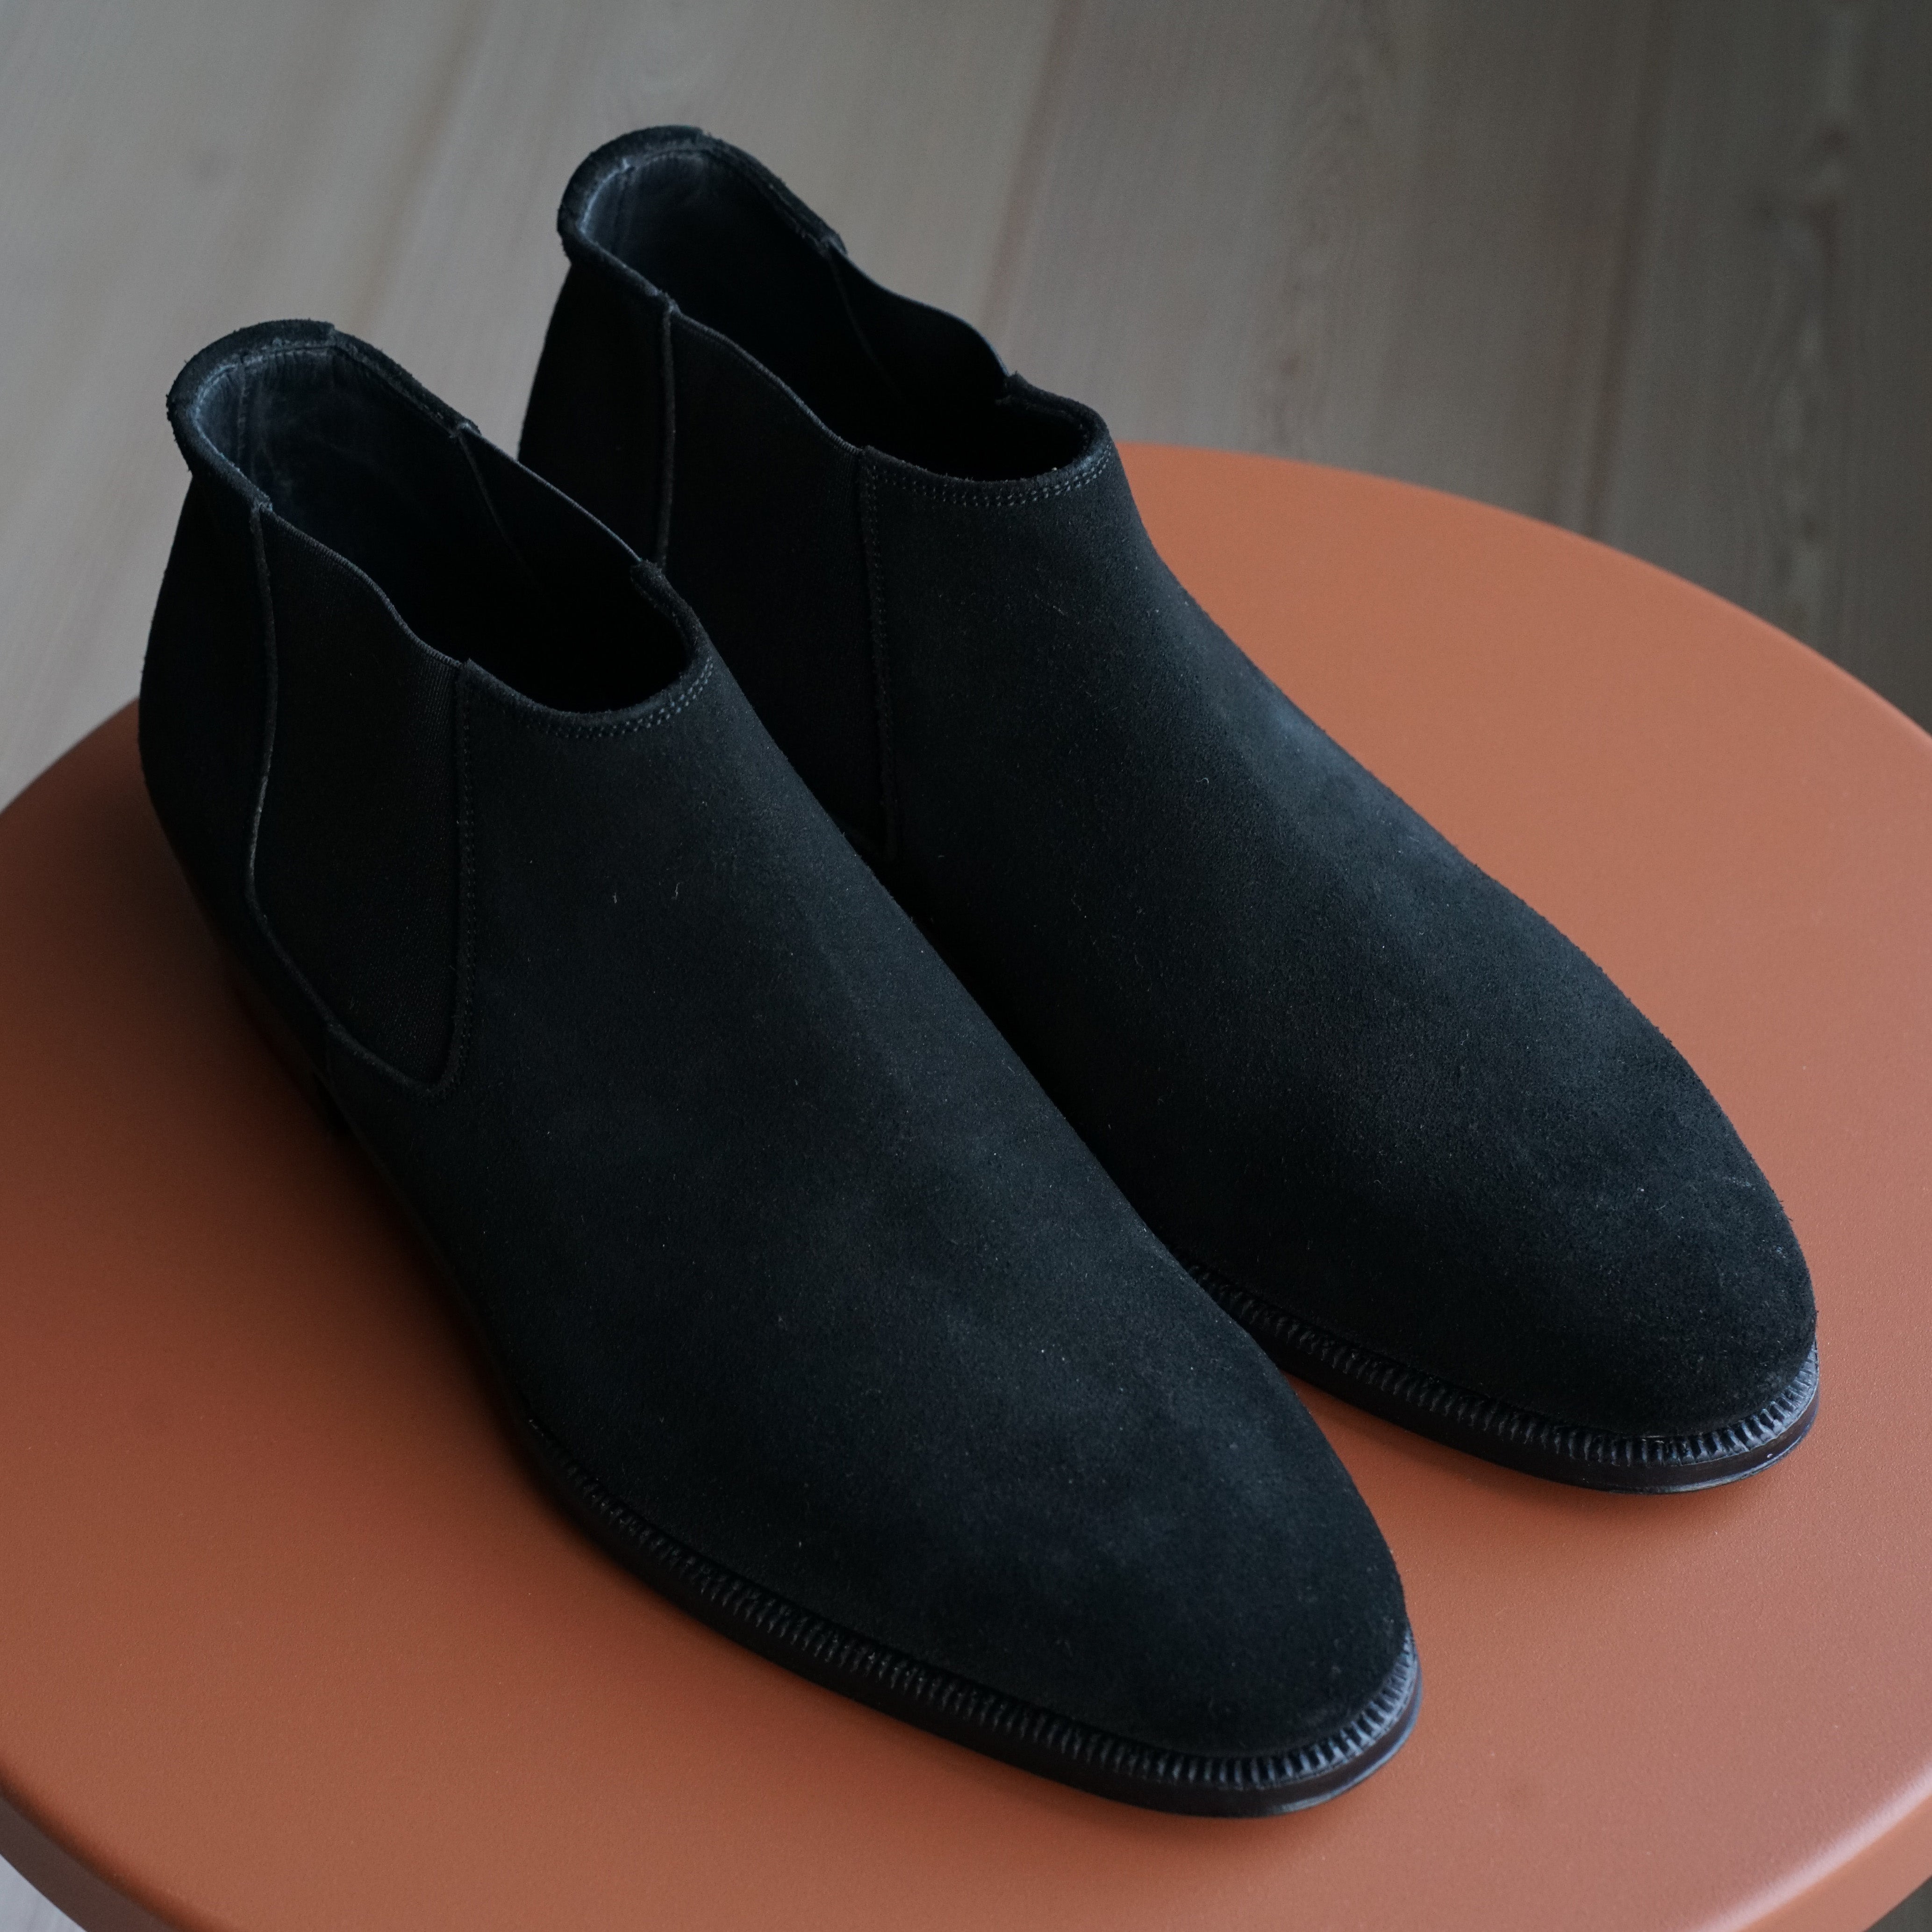 Style Cary Grant - Black Superbuck Suede